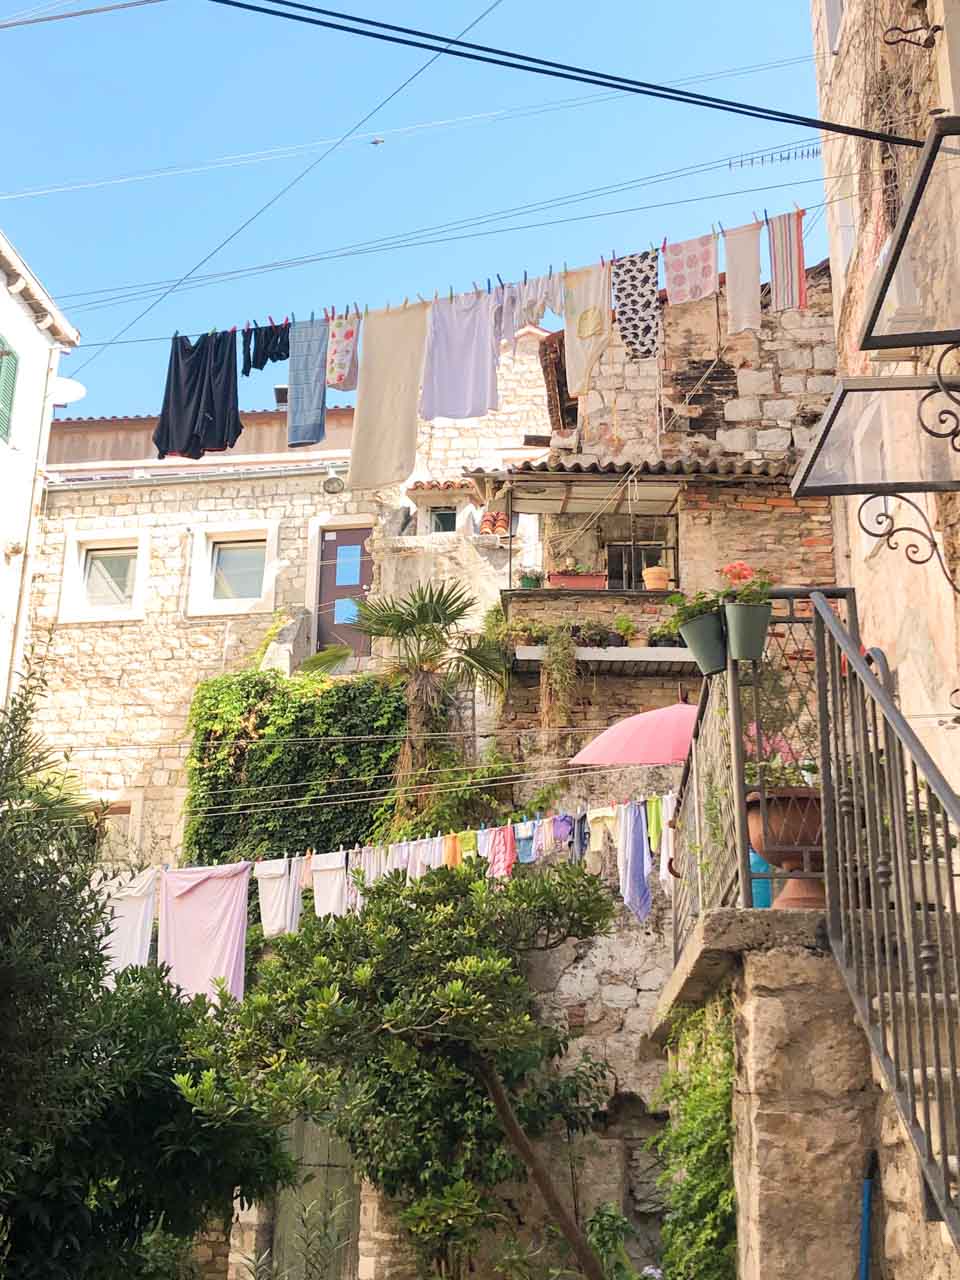 Laundry drying on a line in Split Old Town, Croatia